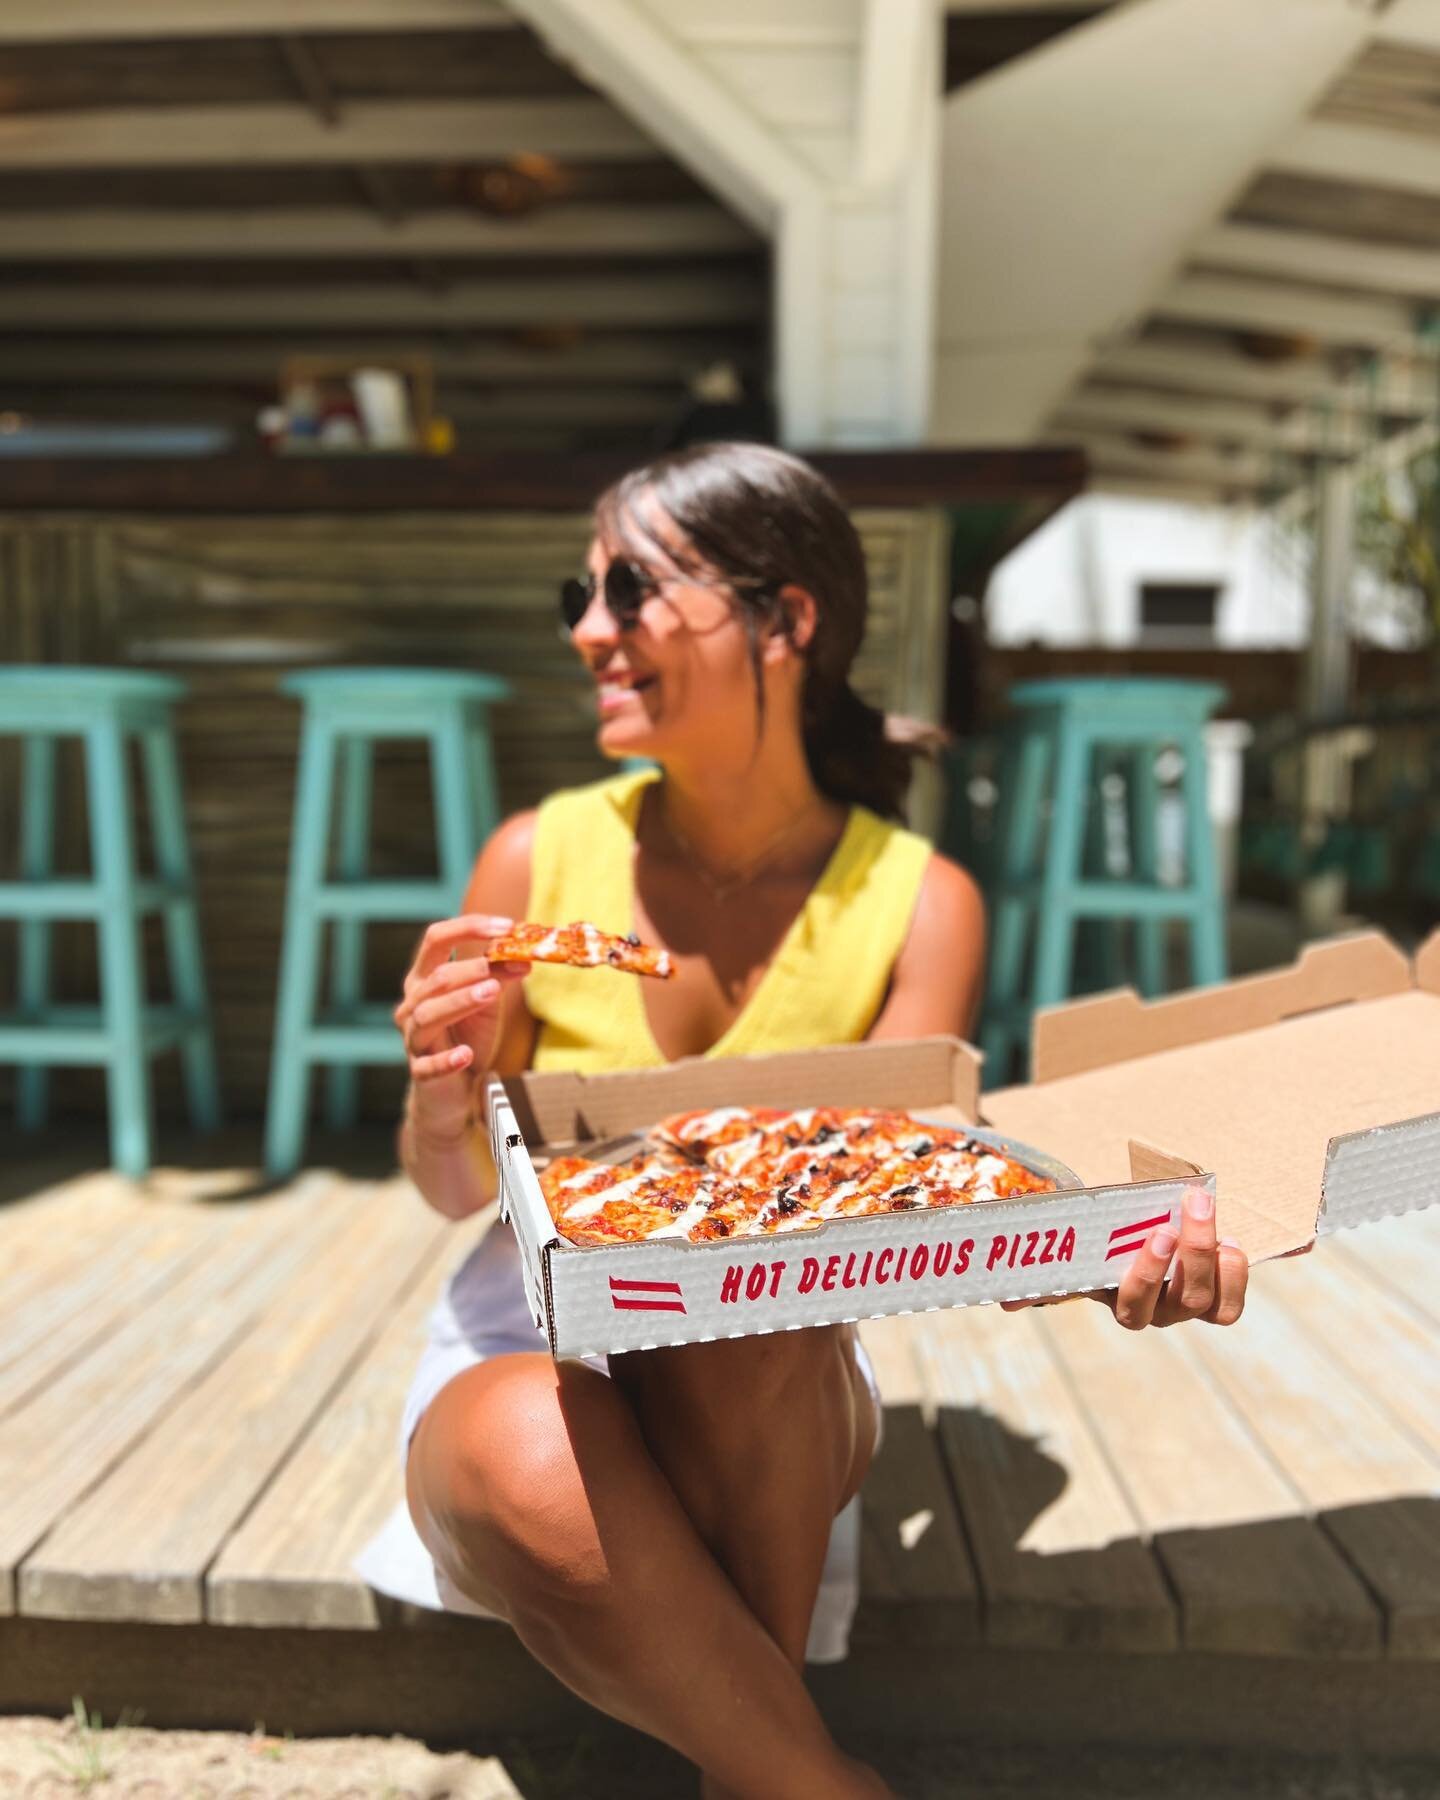 The Shack&rsquo;s new menu additions have us in pieces 🍕😏 Today we have chicken + bacon + ranch &amp; Homemade BBQ Chicken // You can catch these tasty vibes at Hull Bay from 11:30am &lsquo;til 8:00pm (Tuesday thru Sunday)